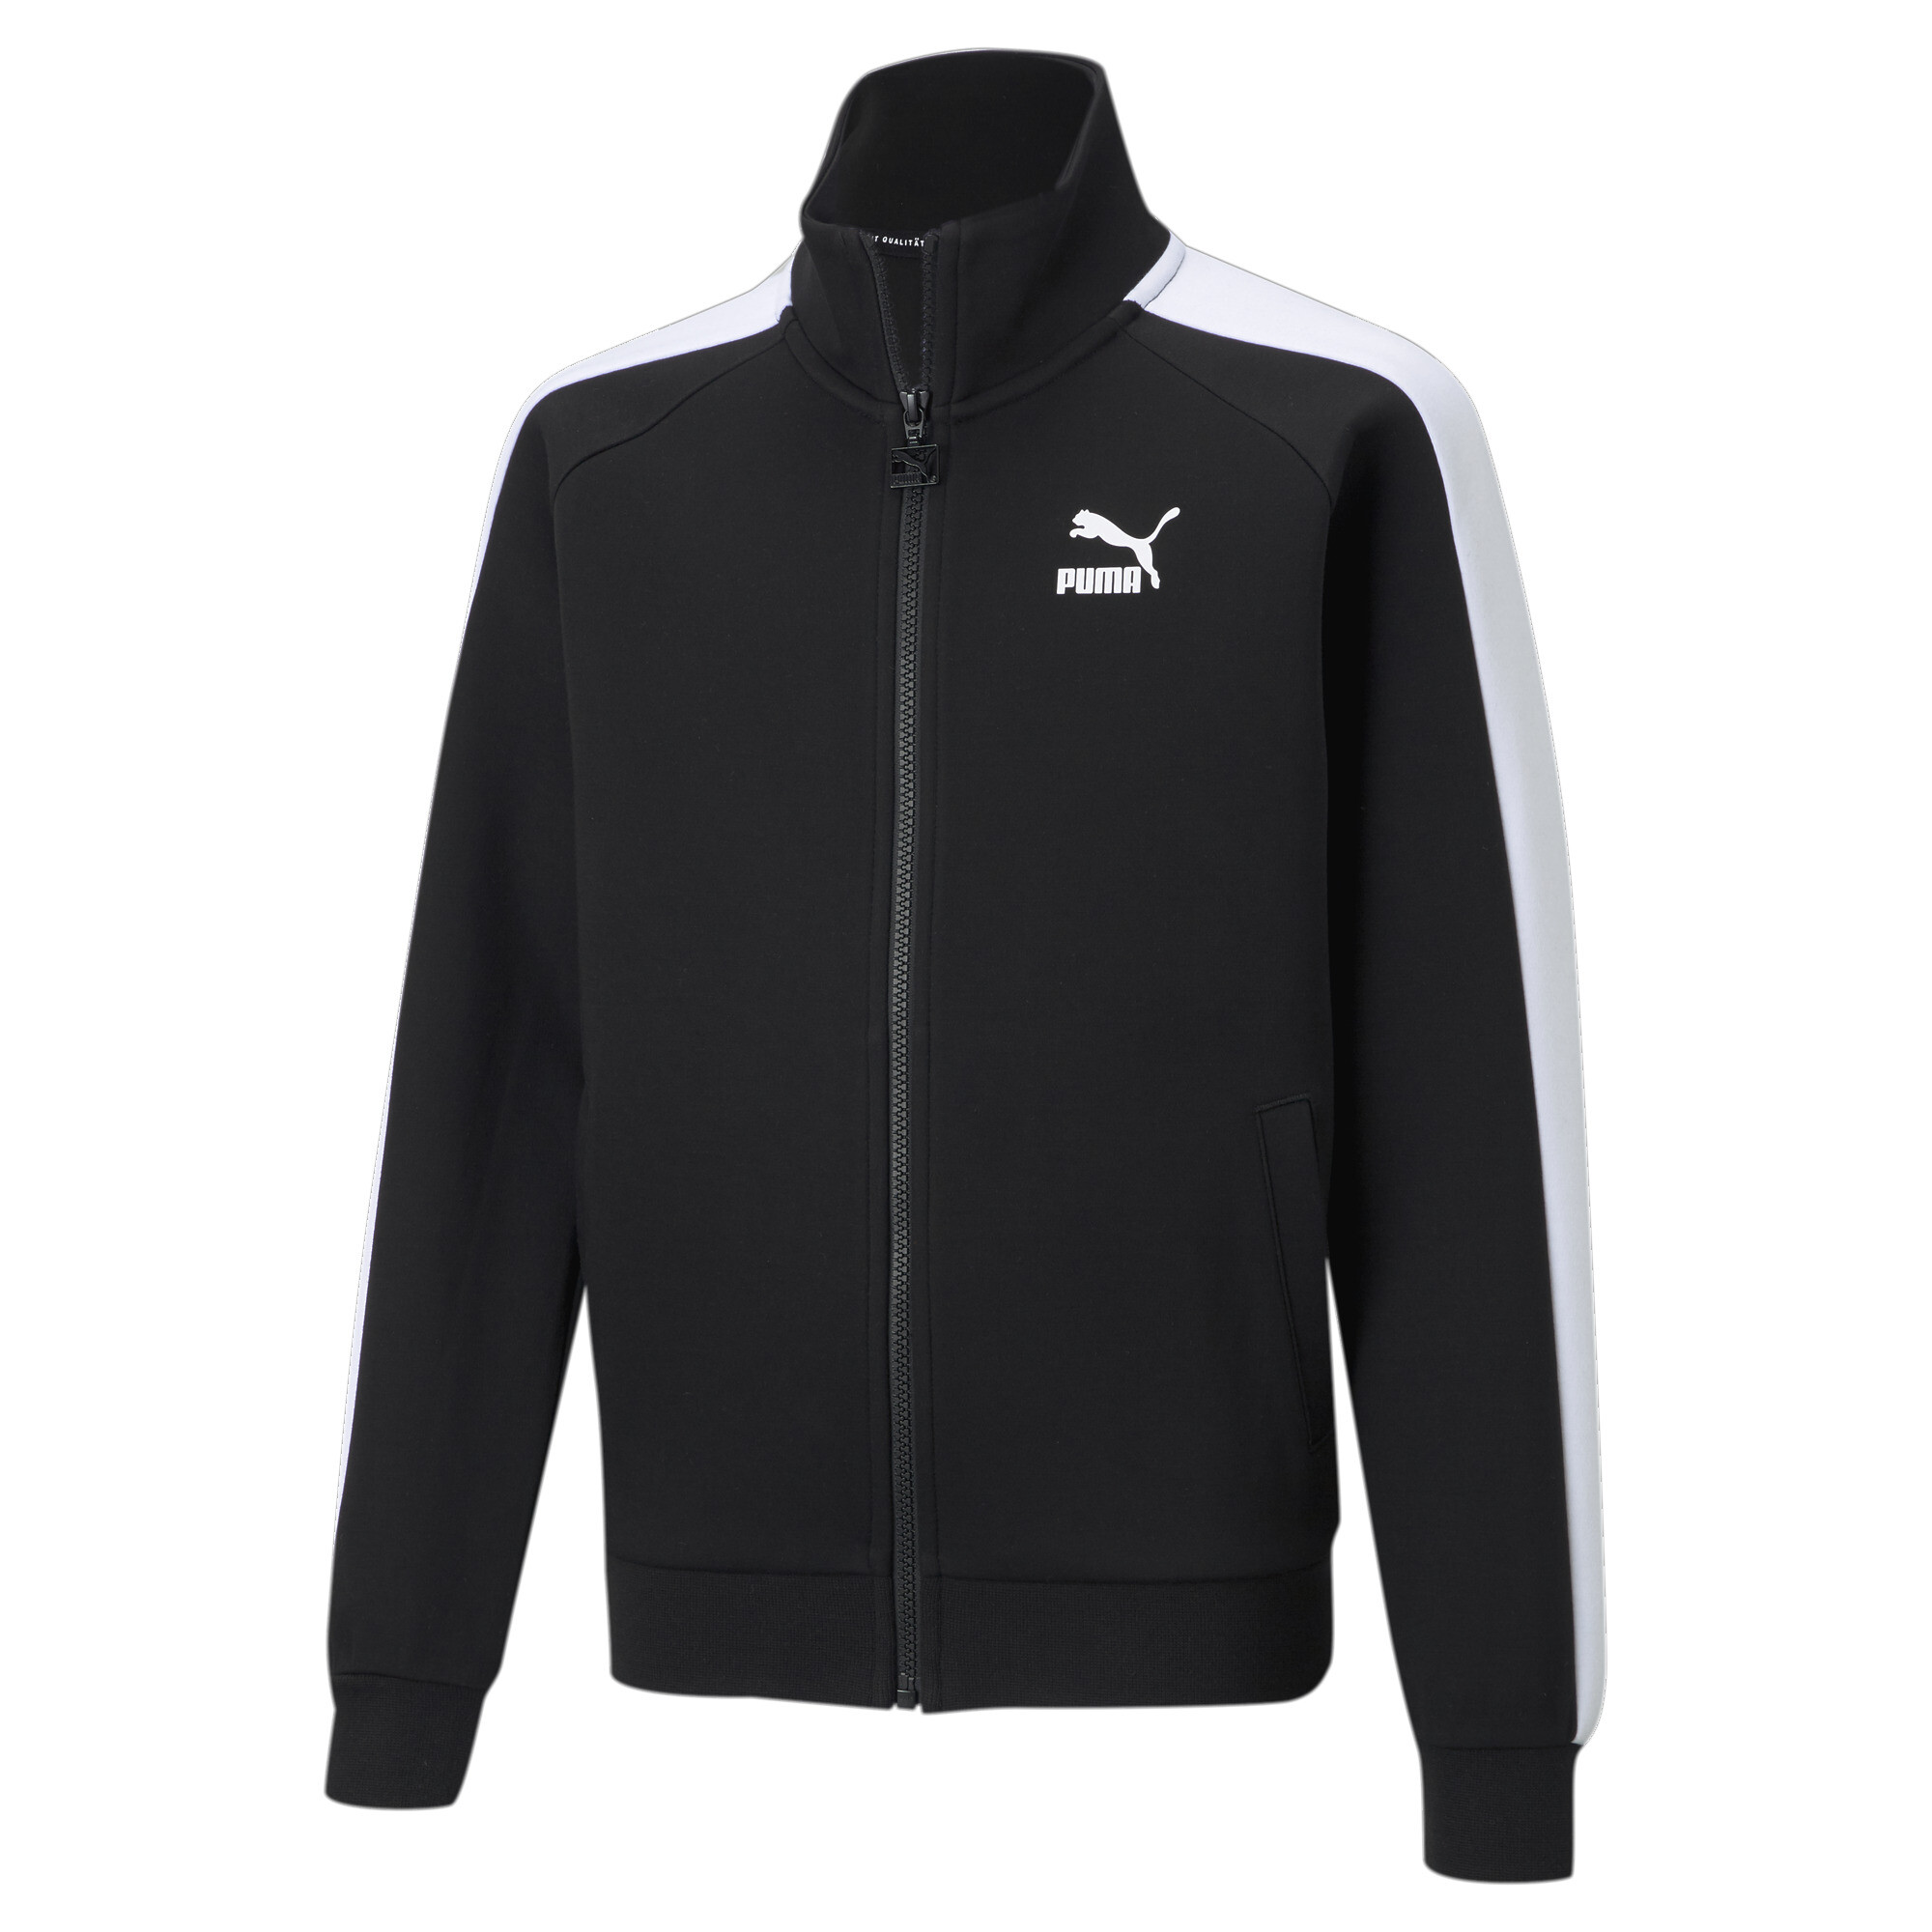 PUMA Iconic T7 Track Jacket In Black, Size 11-12 Youth